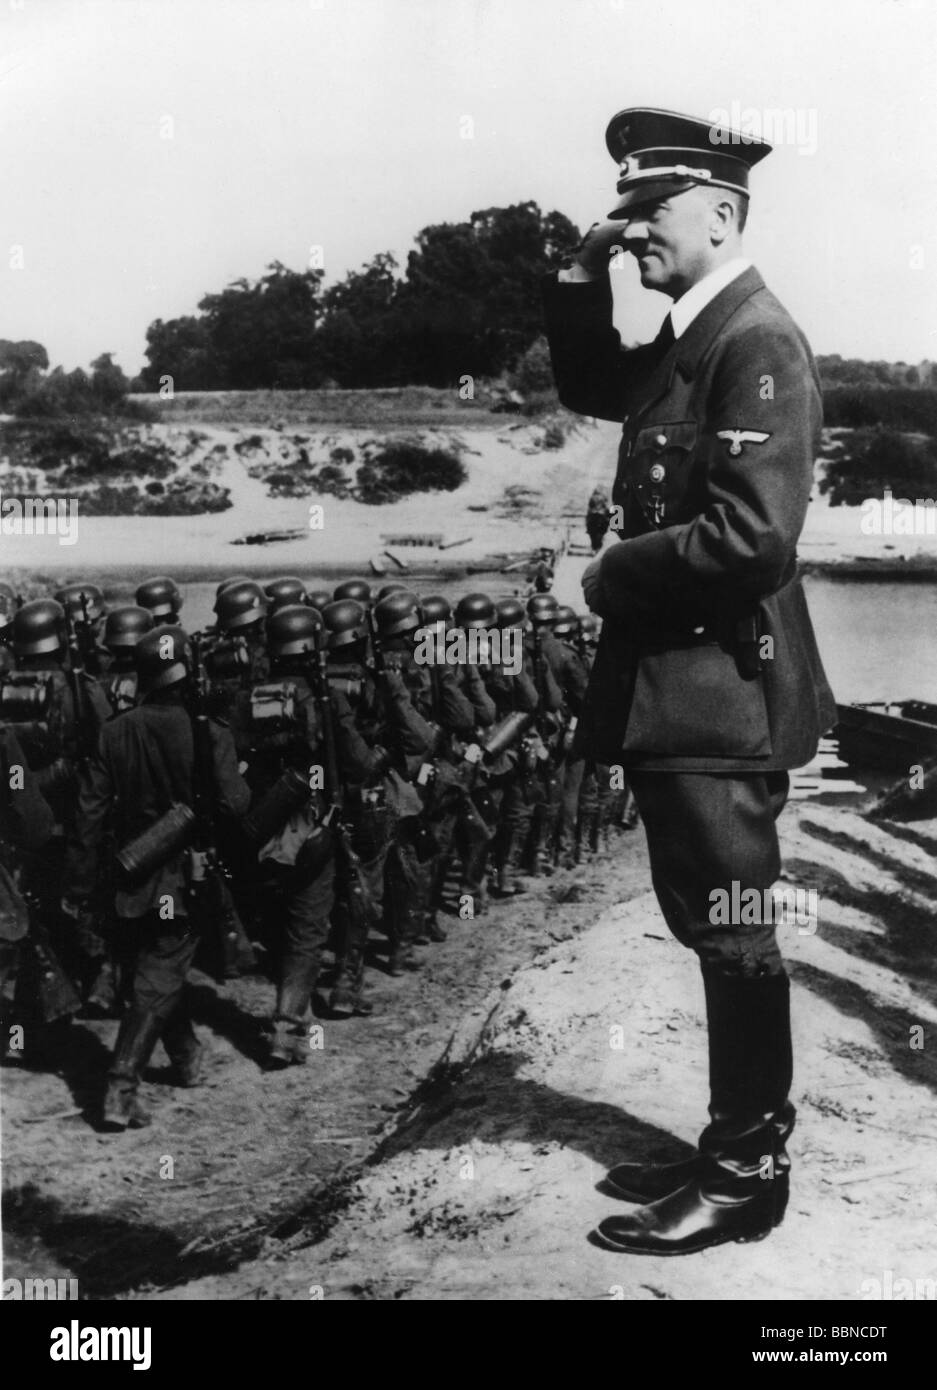 Hitler, Adolf, 20.4.1889 - 30.4.1945, German politician (NSDAP), Fuehrer and Reich Chancellor since 1933, full length, saluting marching soldiers, propaganda photo, Poland, September 1939, Stock Photo